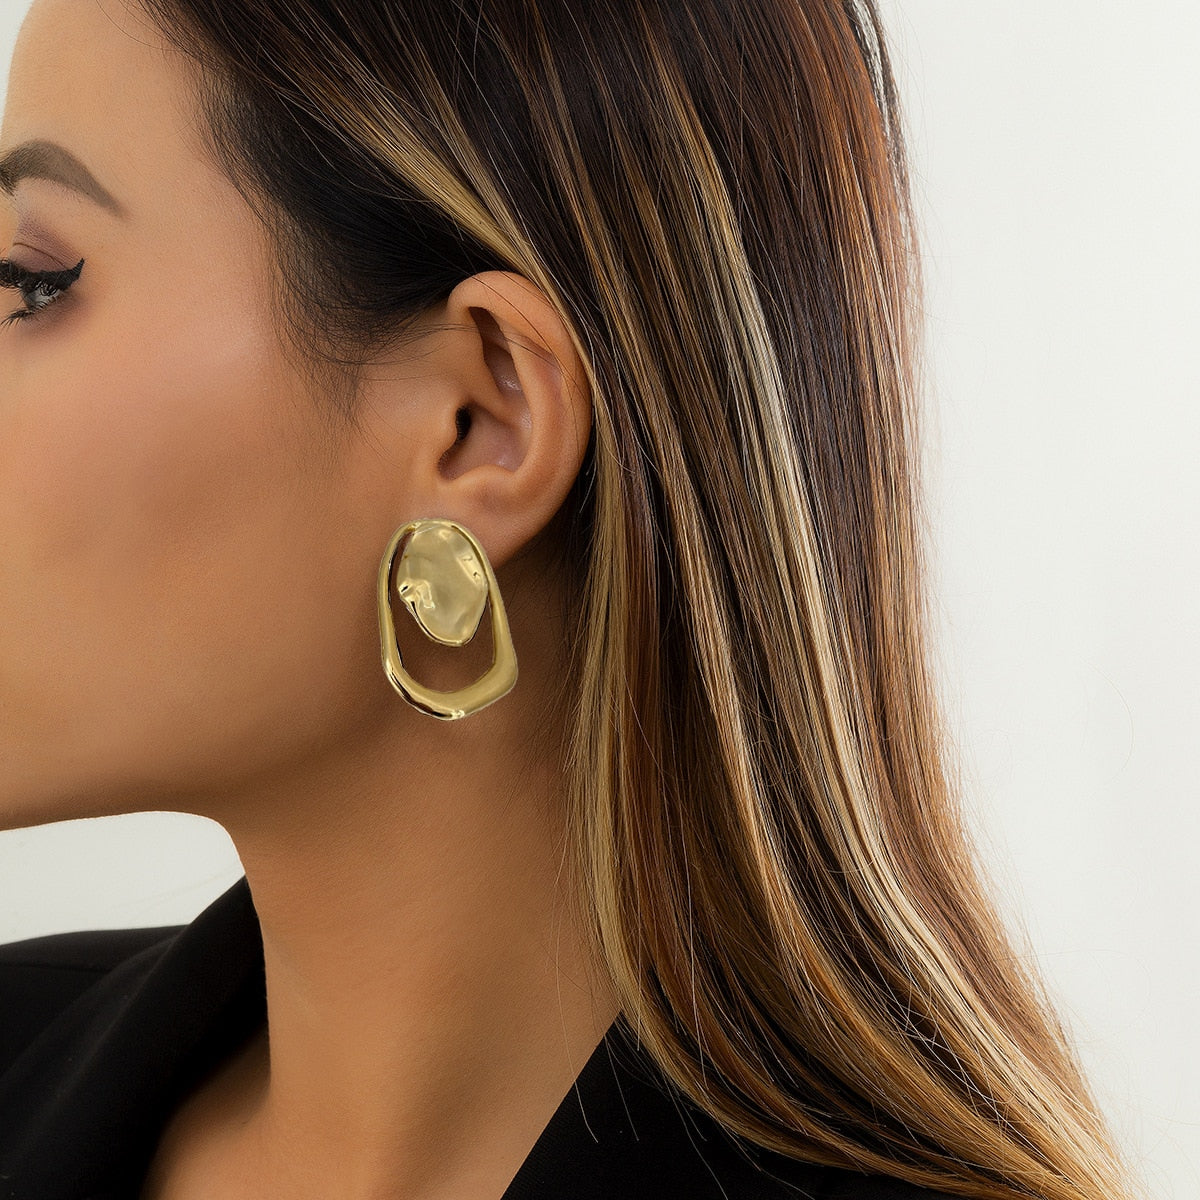 Maytrends New Irregular Hollow Geometric Drop Earrings for Women Unique Design Gold Color Metal Earrings Unusual Jewelry Gift